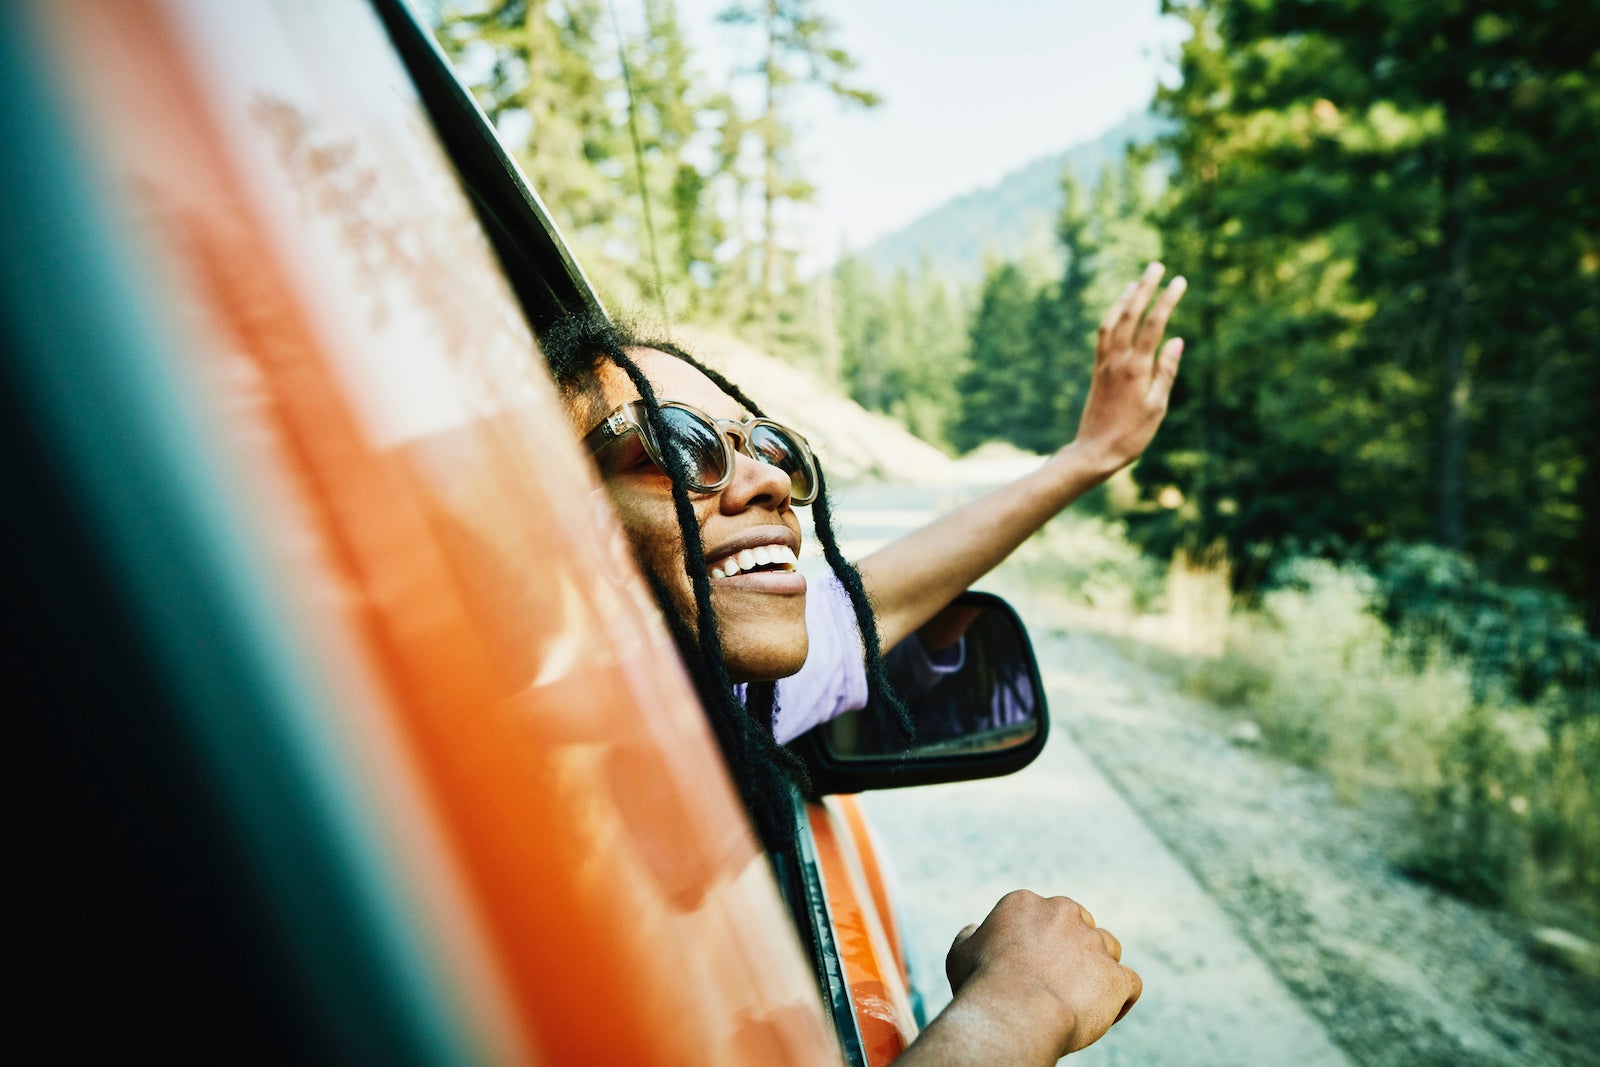 a person leans out the window of a car while smiling